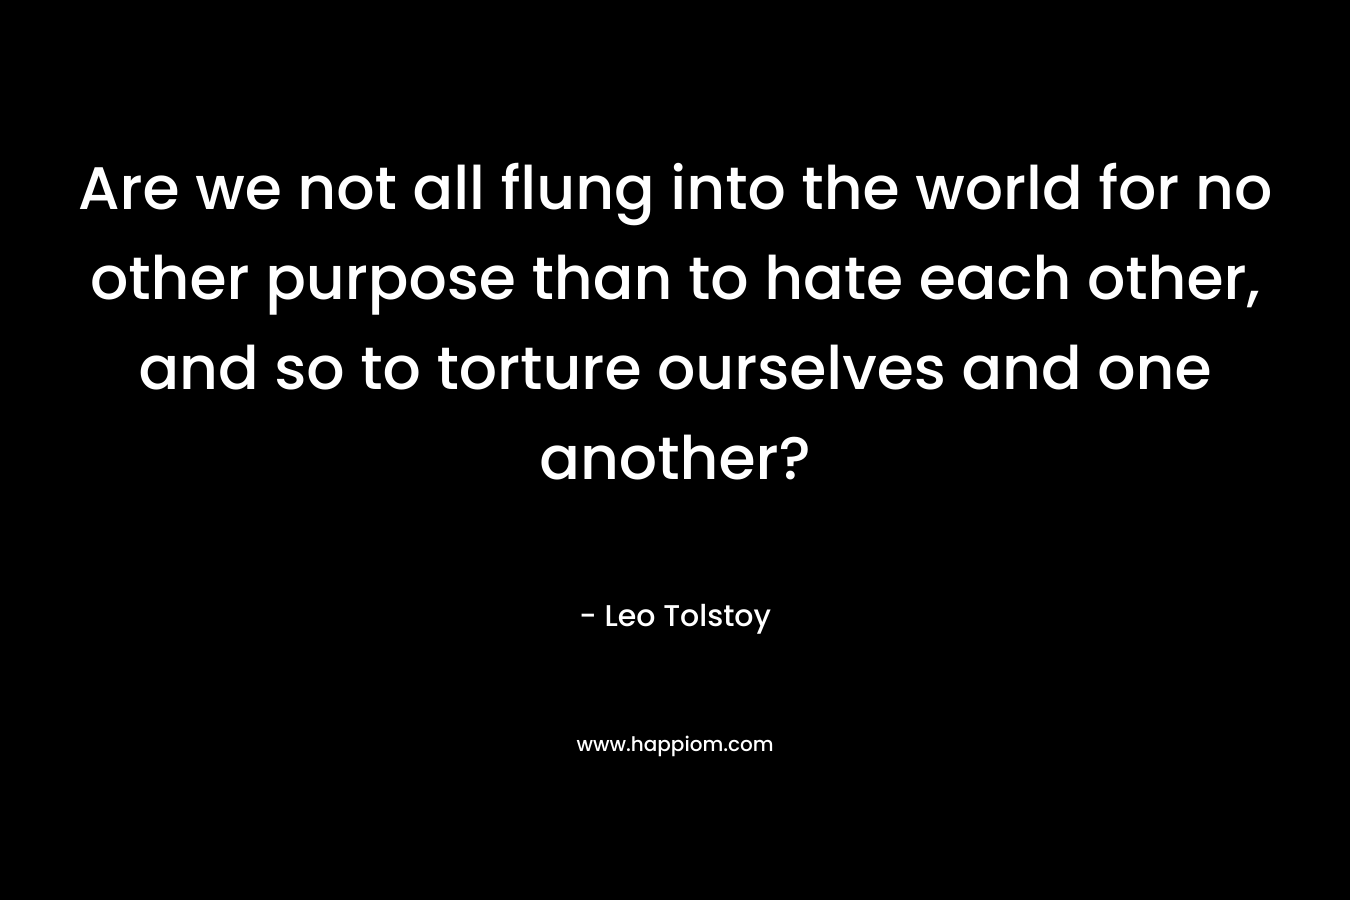 Are we not all flung into the world for no other purpose than to hate each other, and so to torture ourselves and one another? – Leo Tolstoy